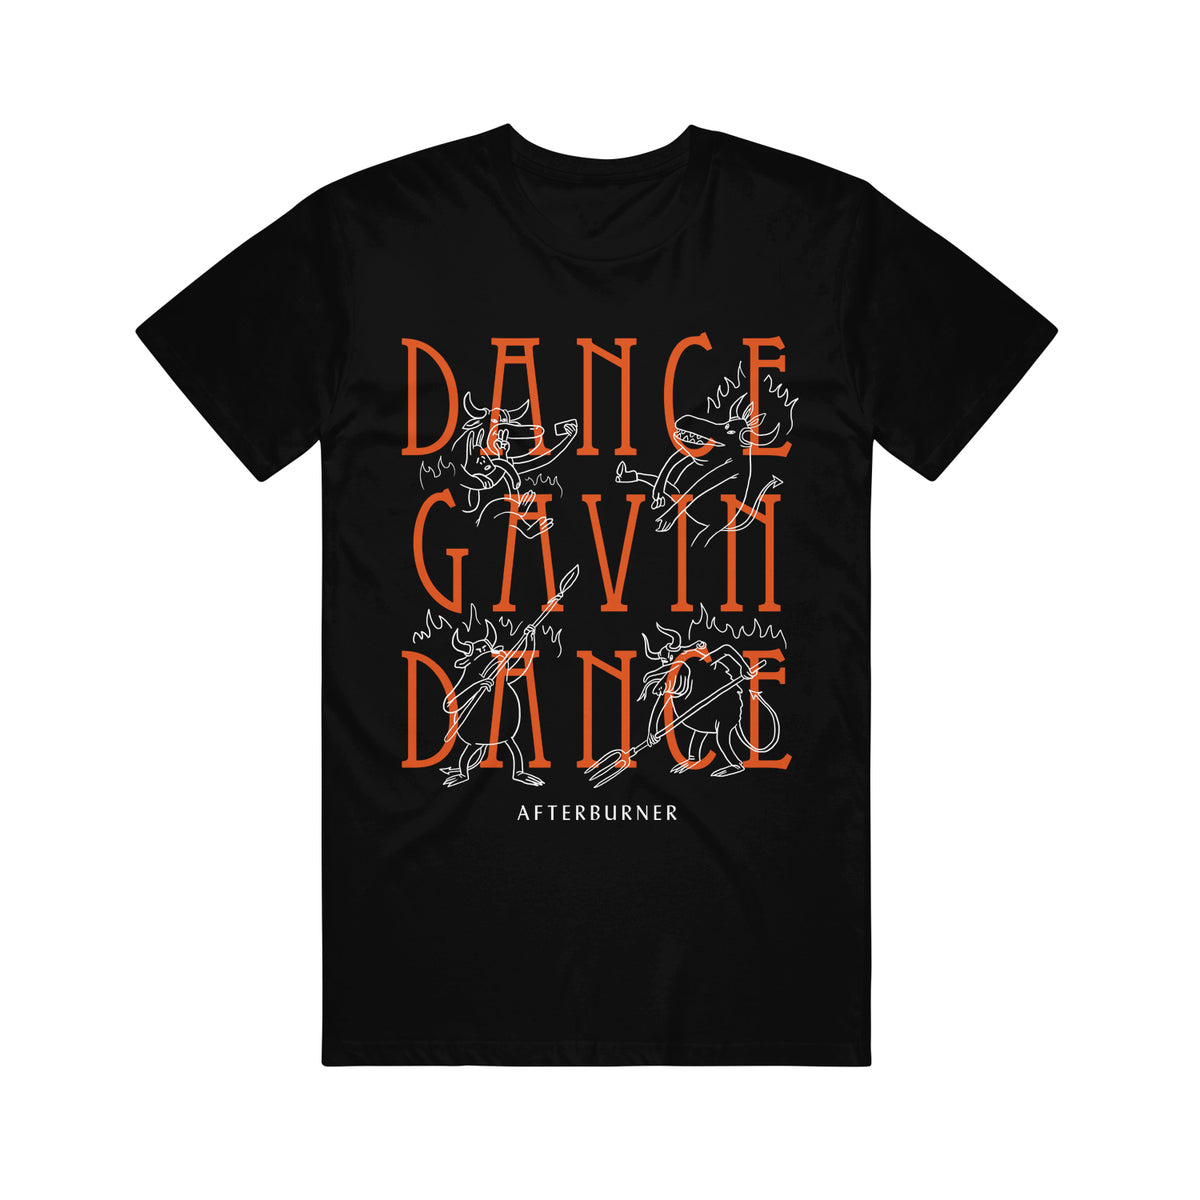 black tee shirt on white background with full chest print that says dance gavin dance in stacked orange print and has four white outlined characters dispersed around and says afterburner on the bottom